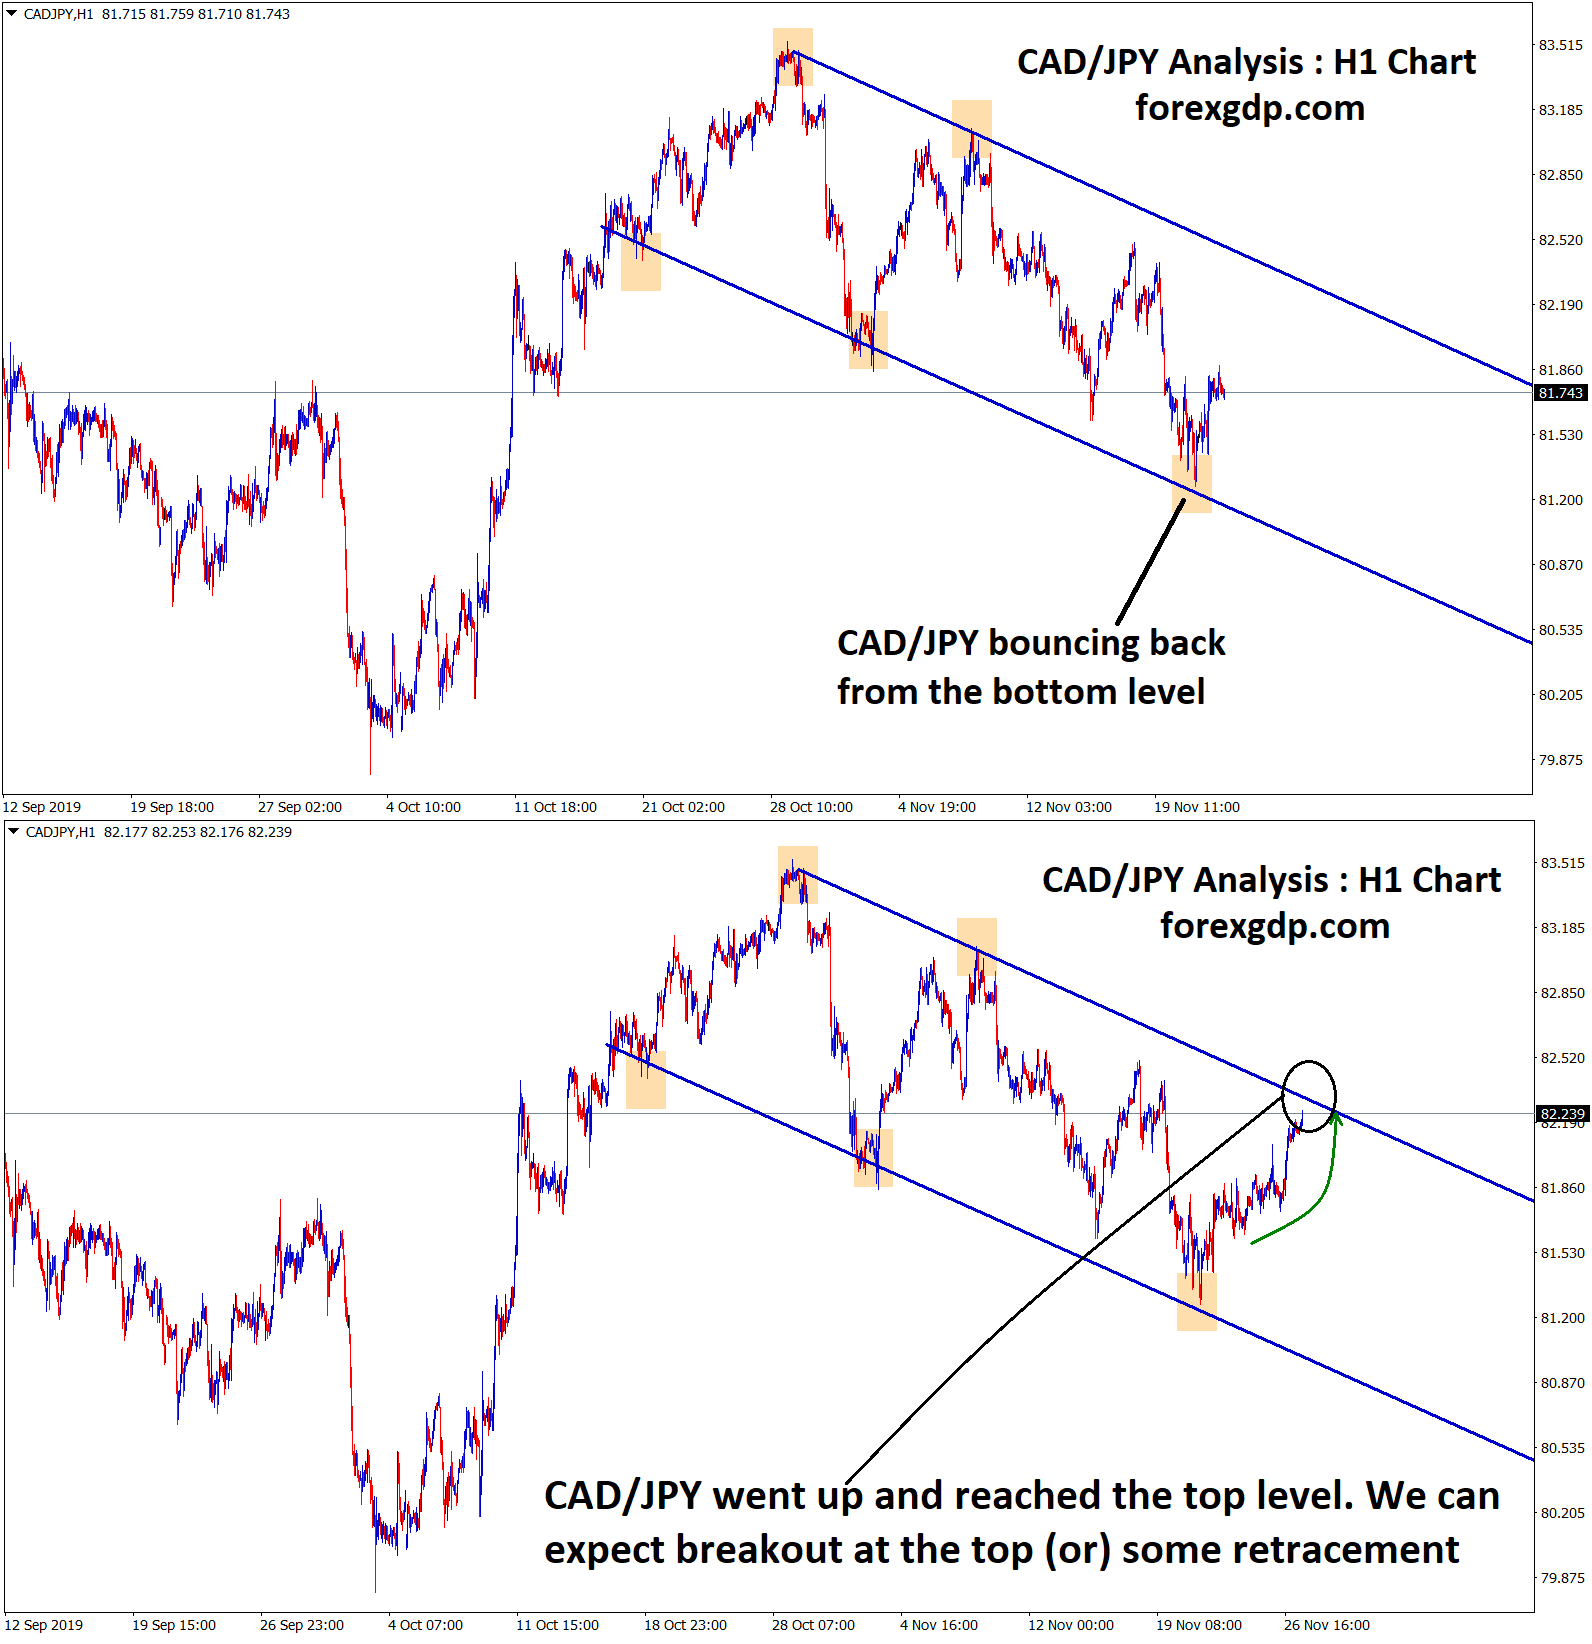 cad jpy touched the top level ,expecting for breakout or retracement